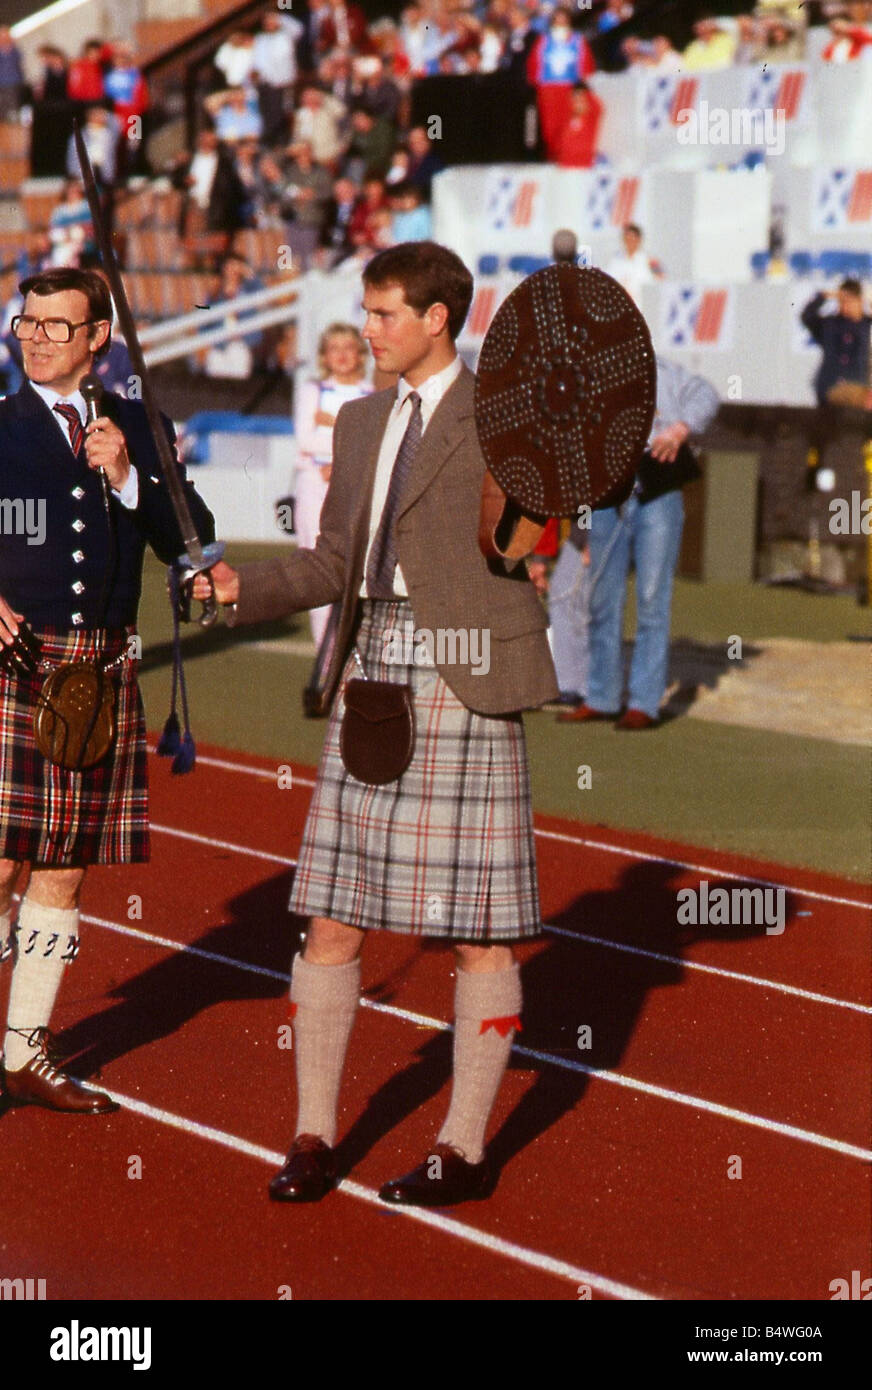 prince-edward-opens-the-commonwealth-highland-july-1986-games-claymore-B4WG0A.jpg